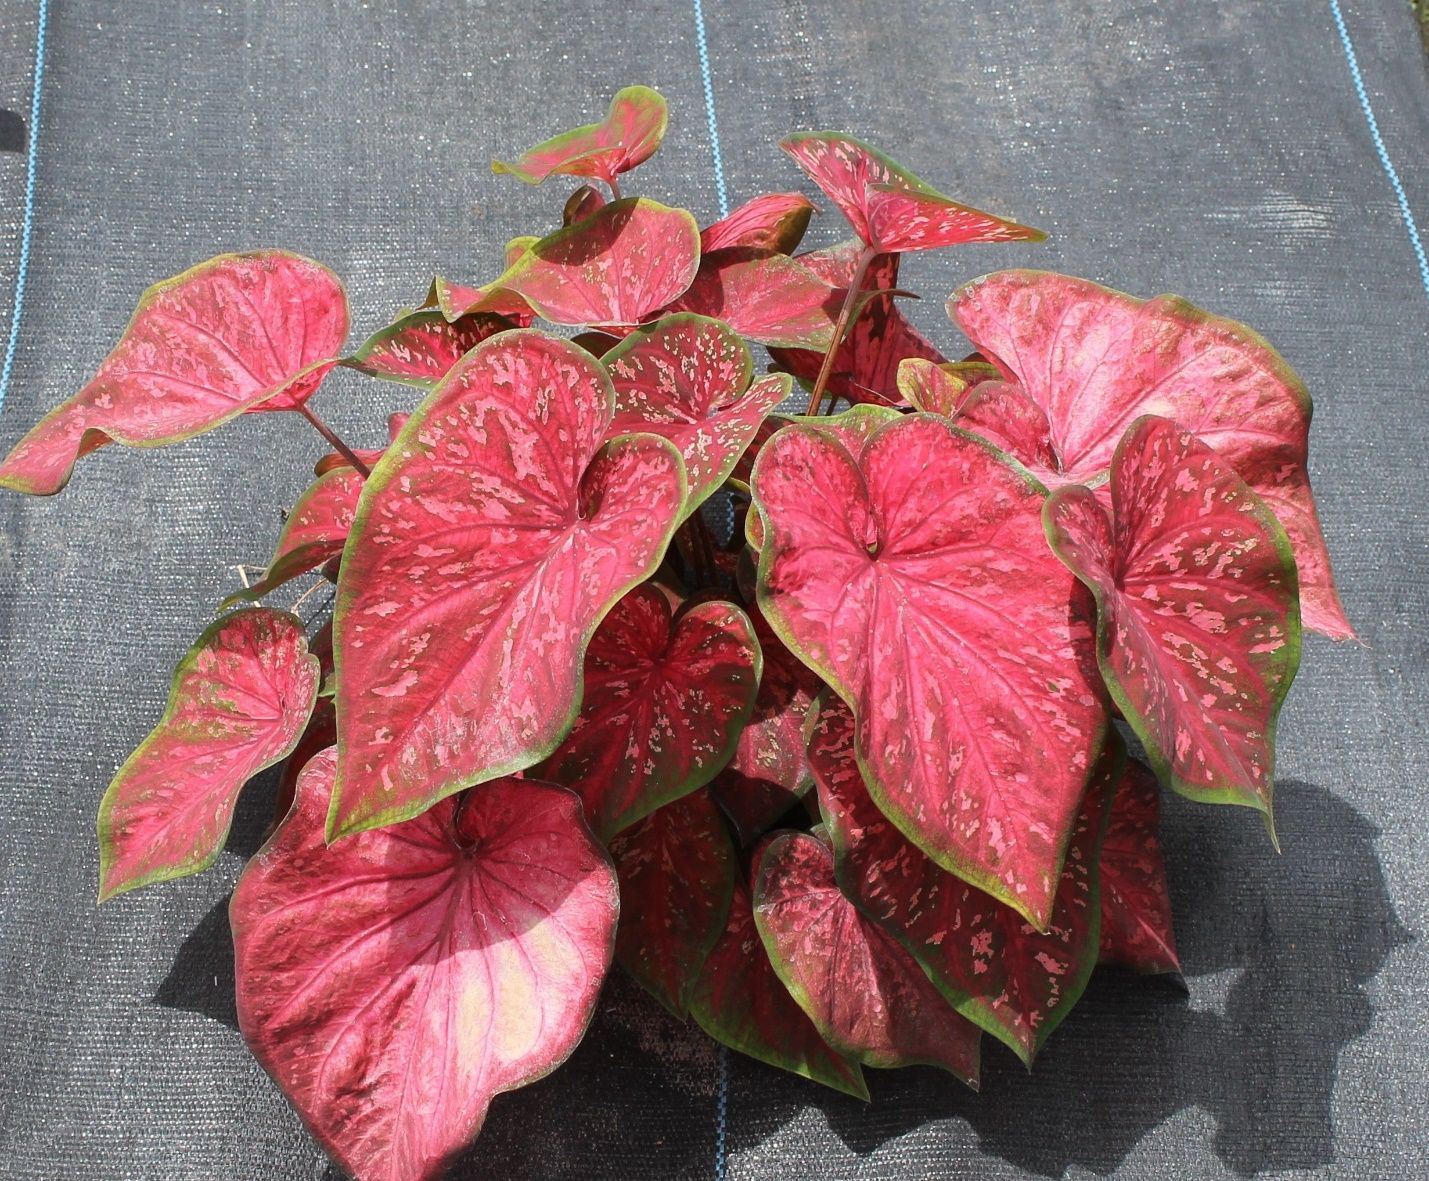 Typical leaves of ‘Crimson Skye’ caladium (approximately 8 weeks old) grown under shade in Wimauma, FL. The plant was grown from one No.1 tuber. 